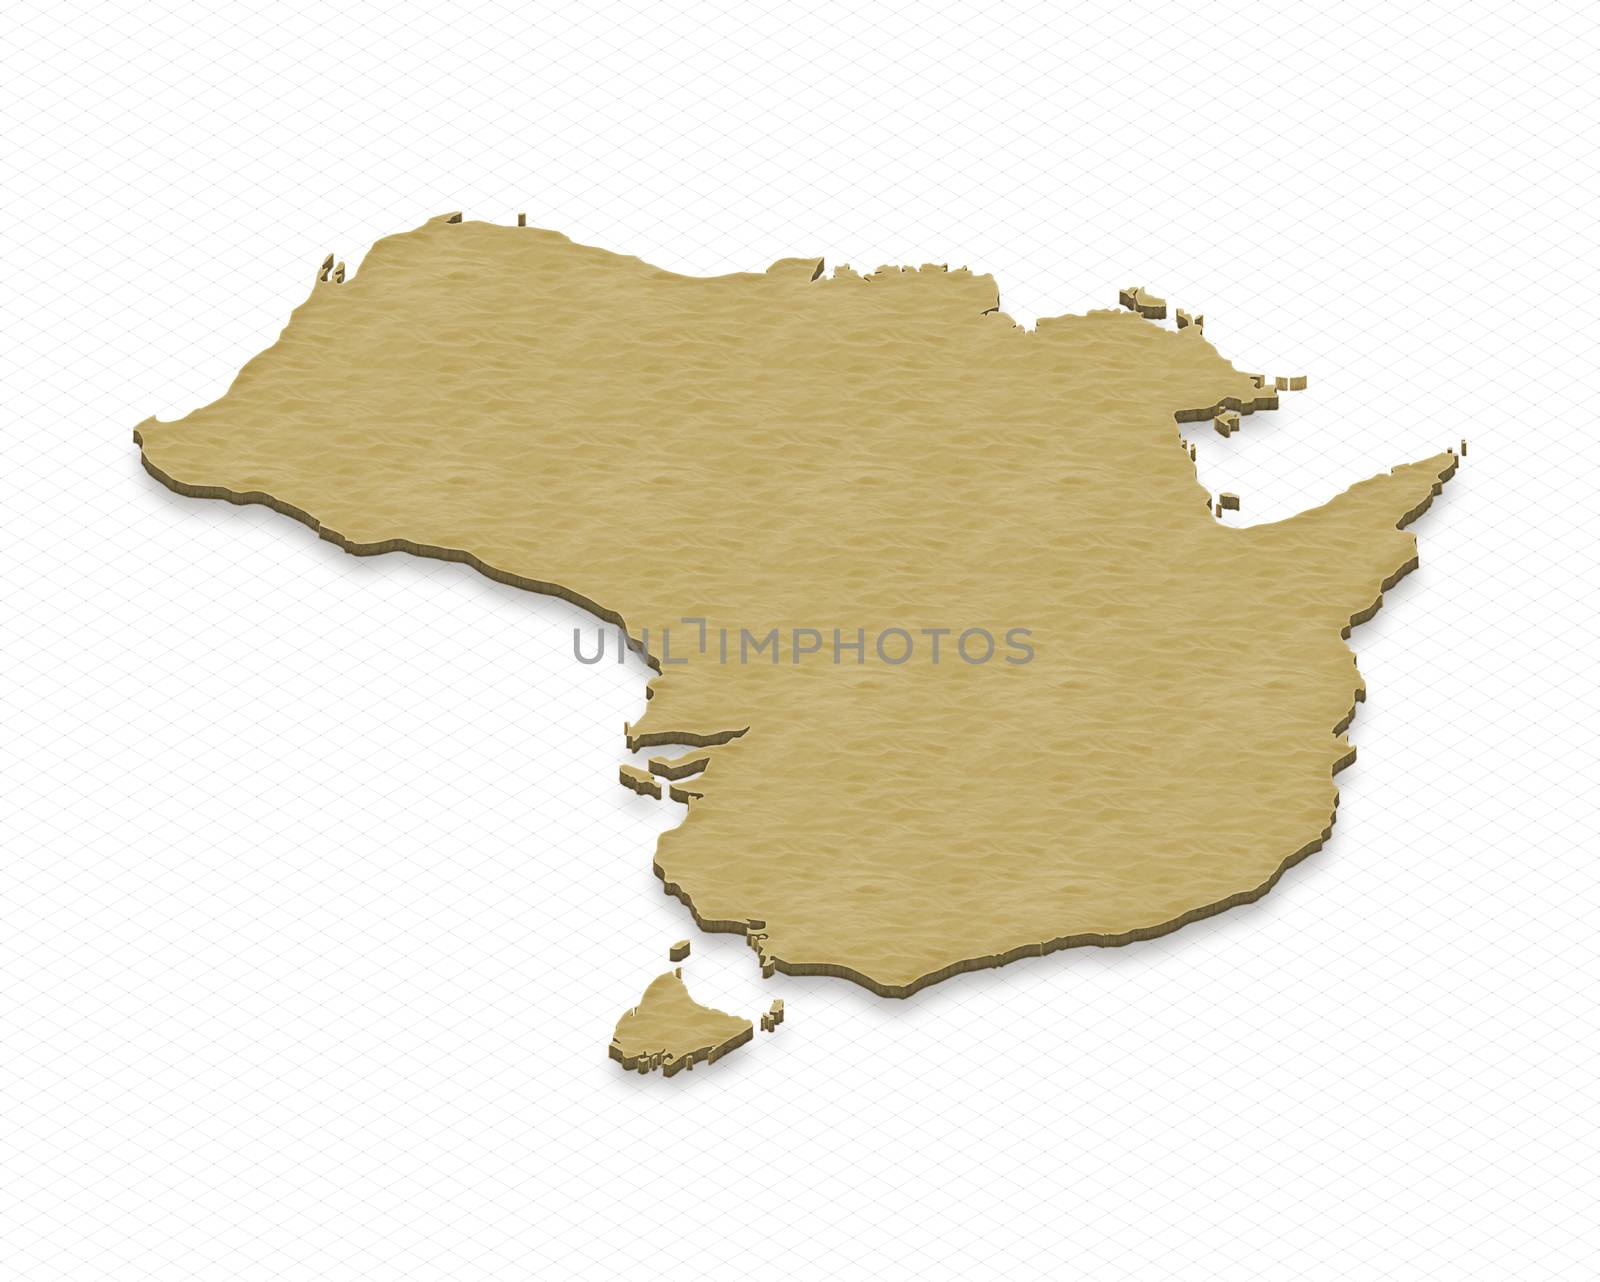 Illustration of a sand ground map of Australia on grid background. Left 3D isometric projection.